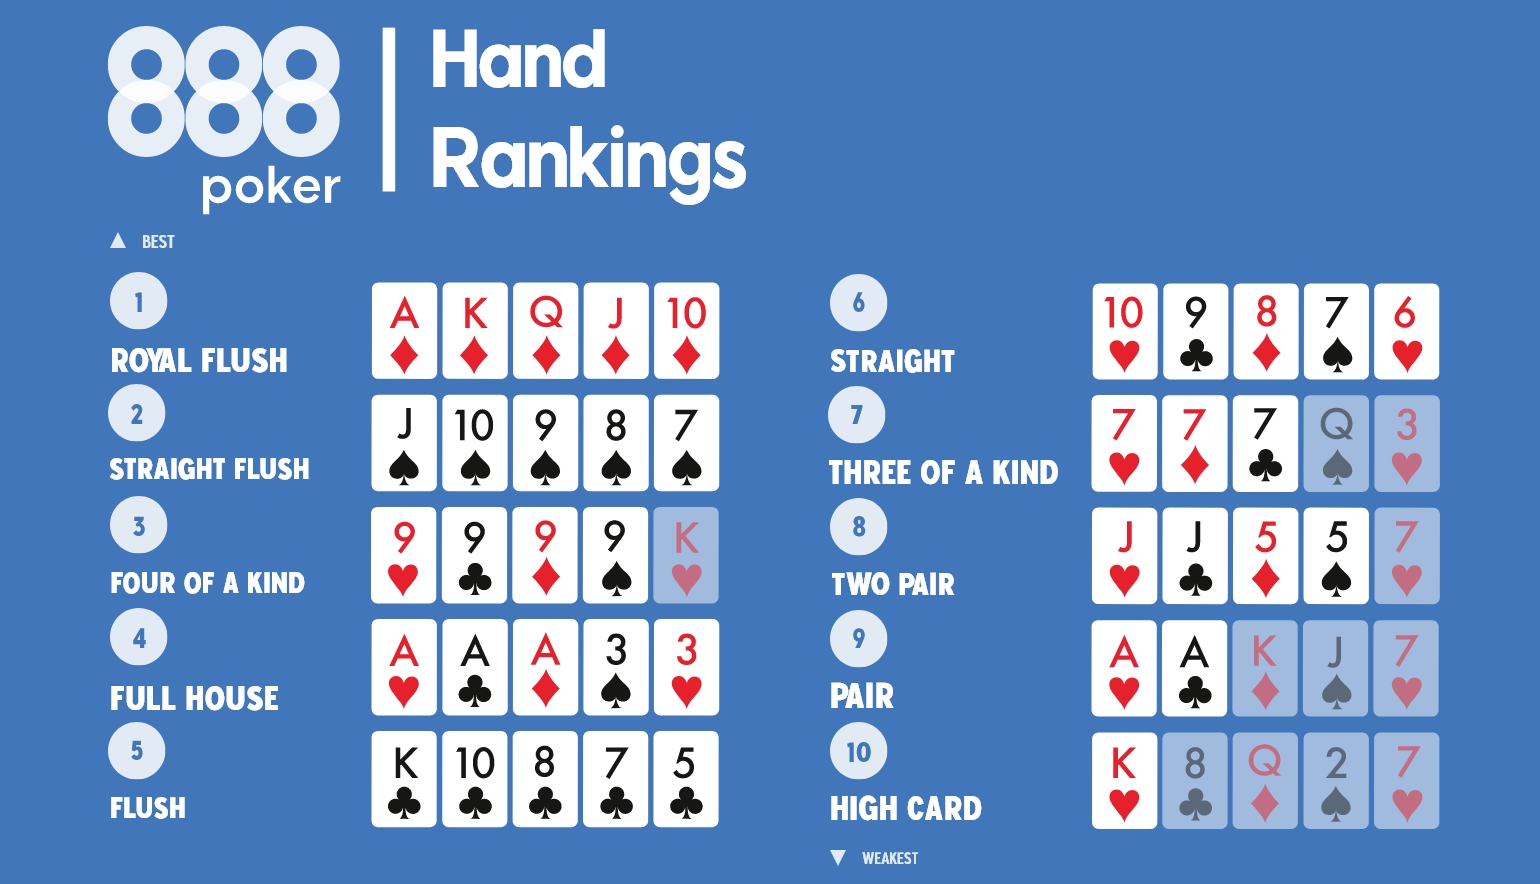 How are poker hands ranked?